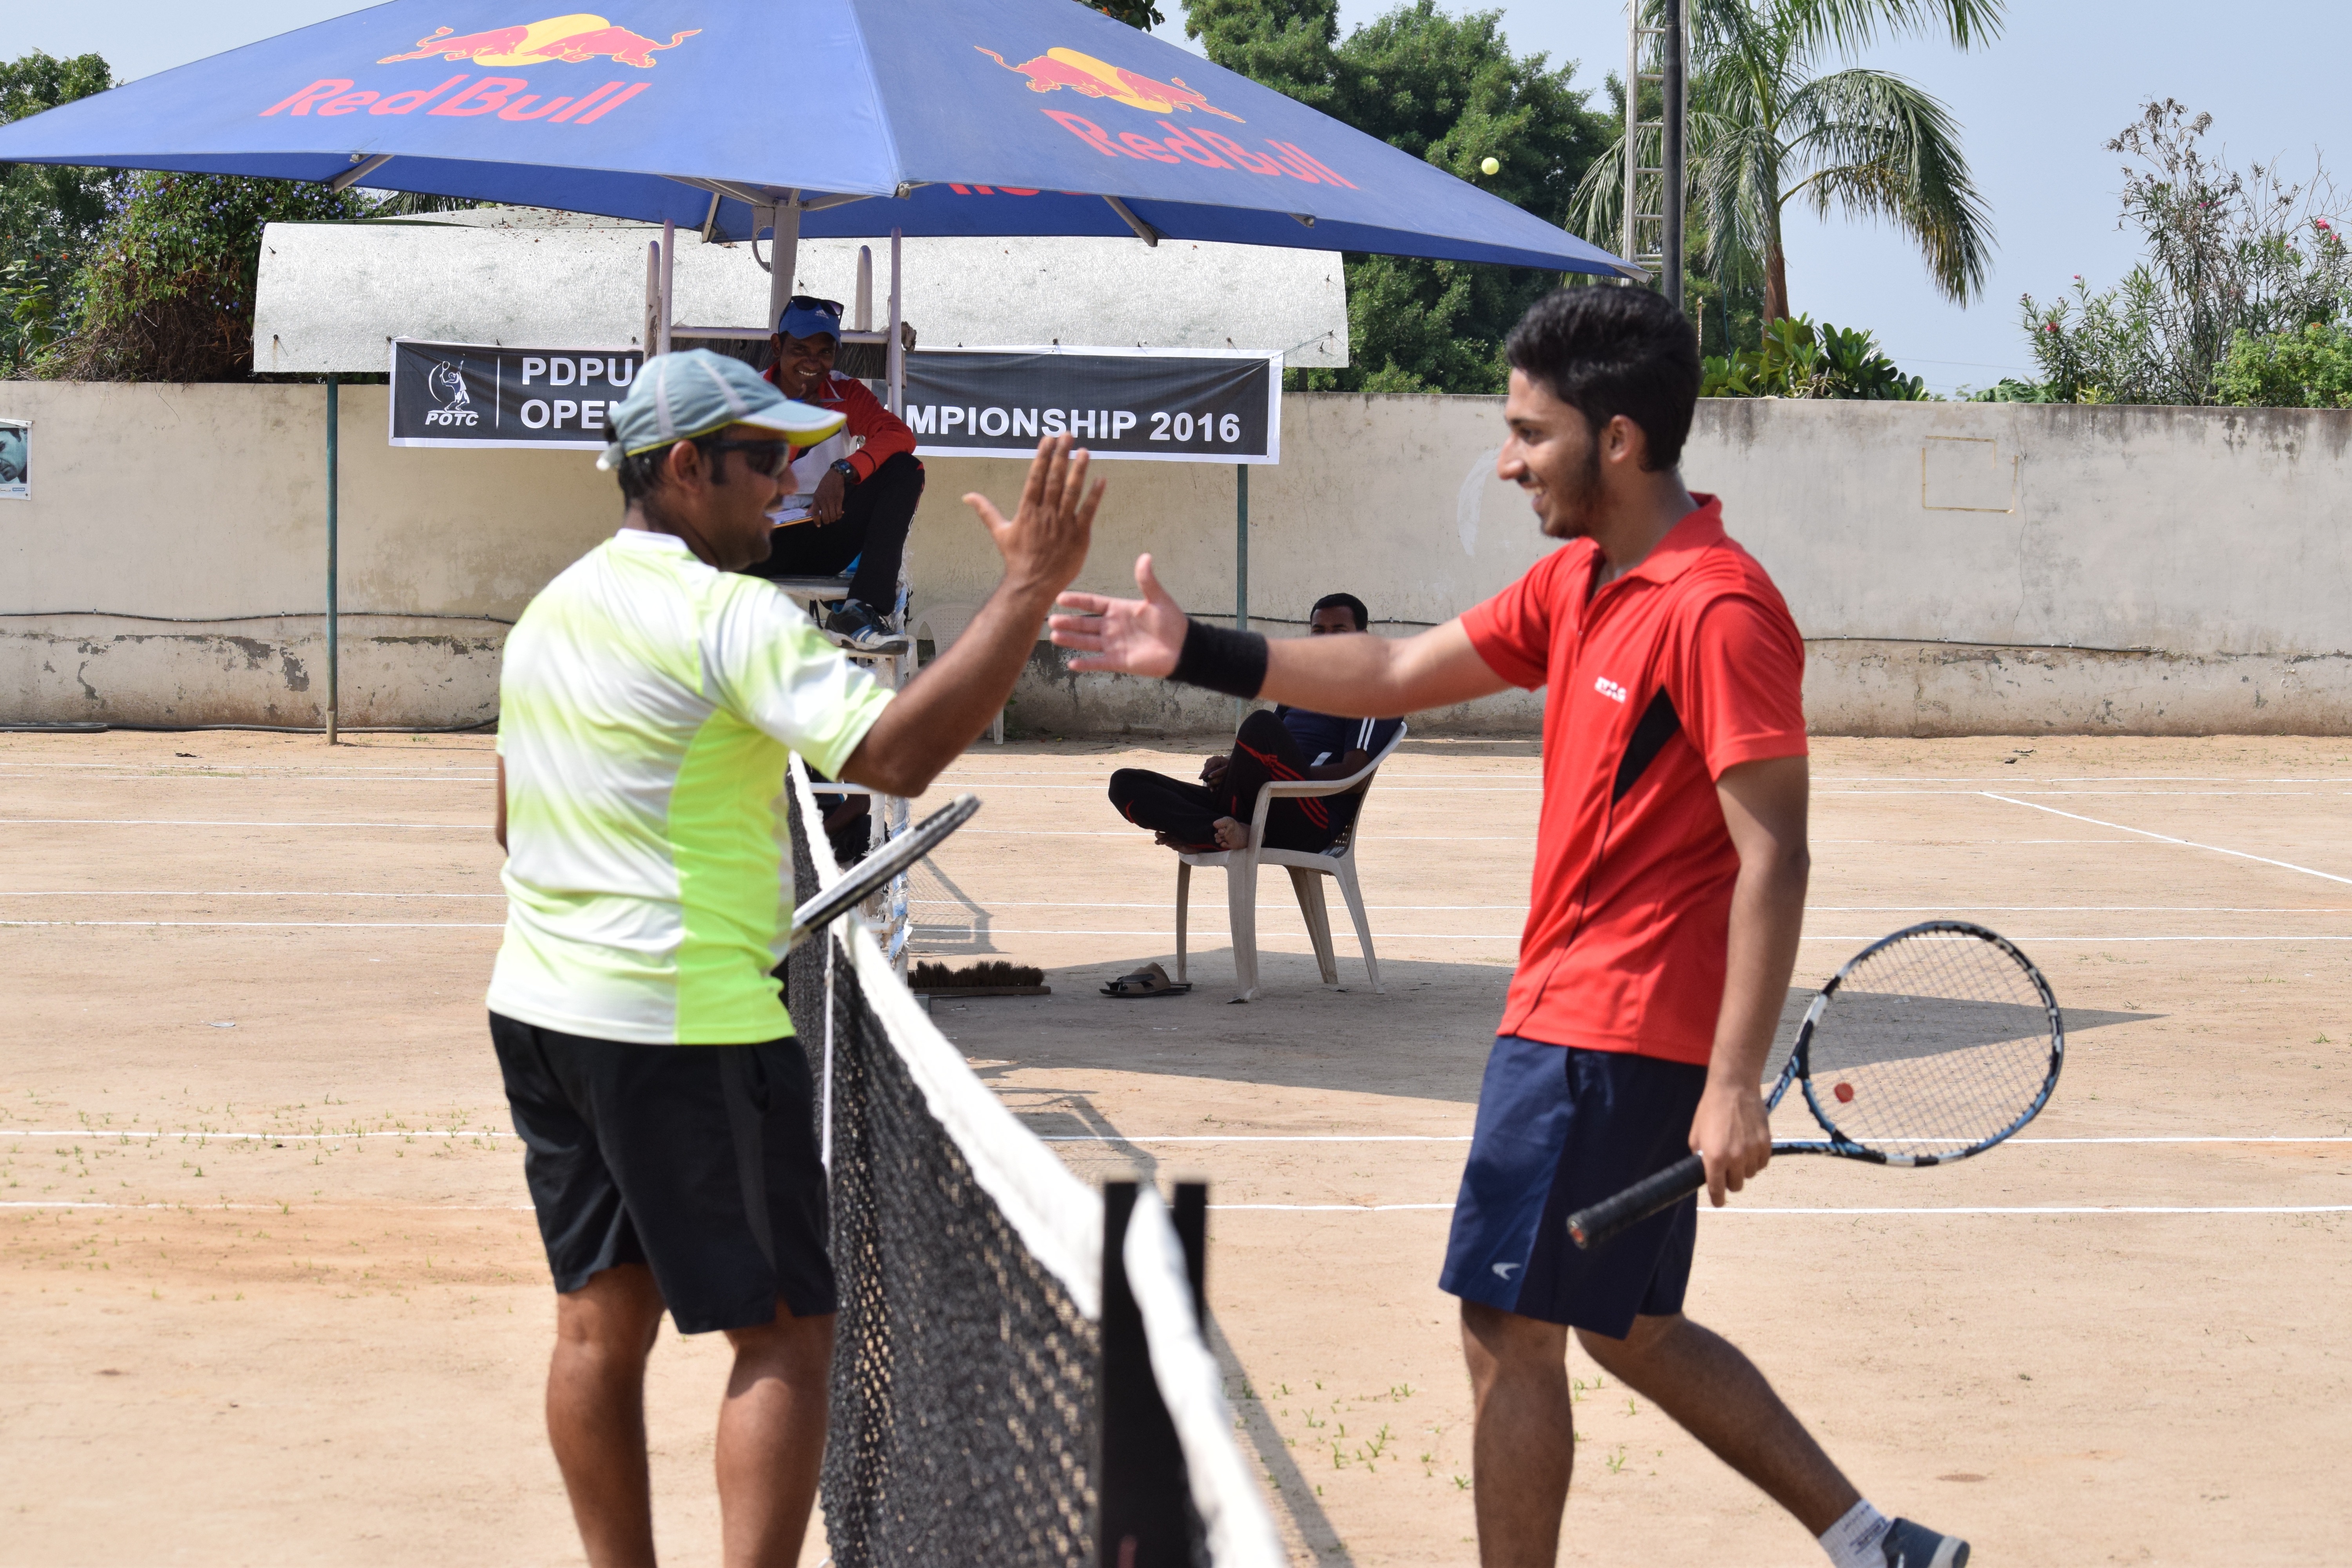 Day 3 Results and Day 4 Fixtures - Live from PDPU Open Tennis Championship 2016